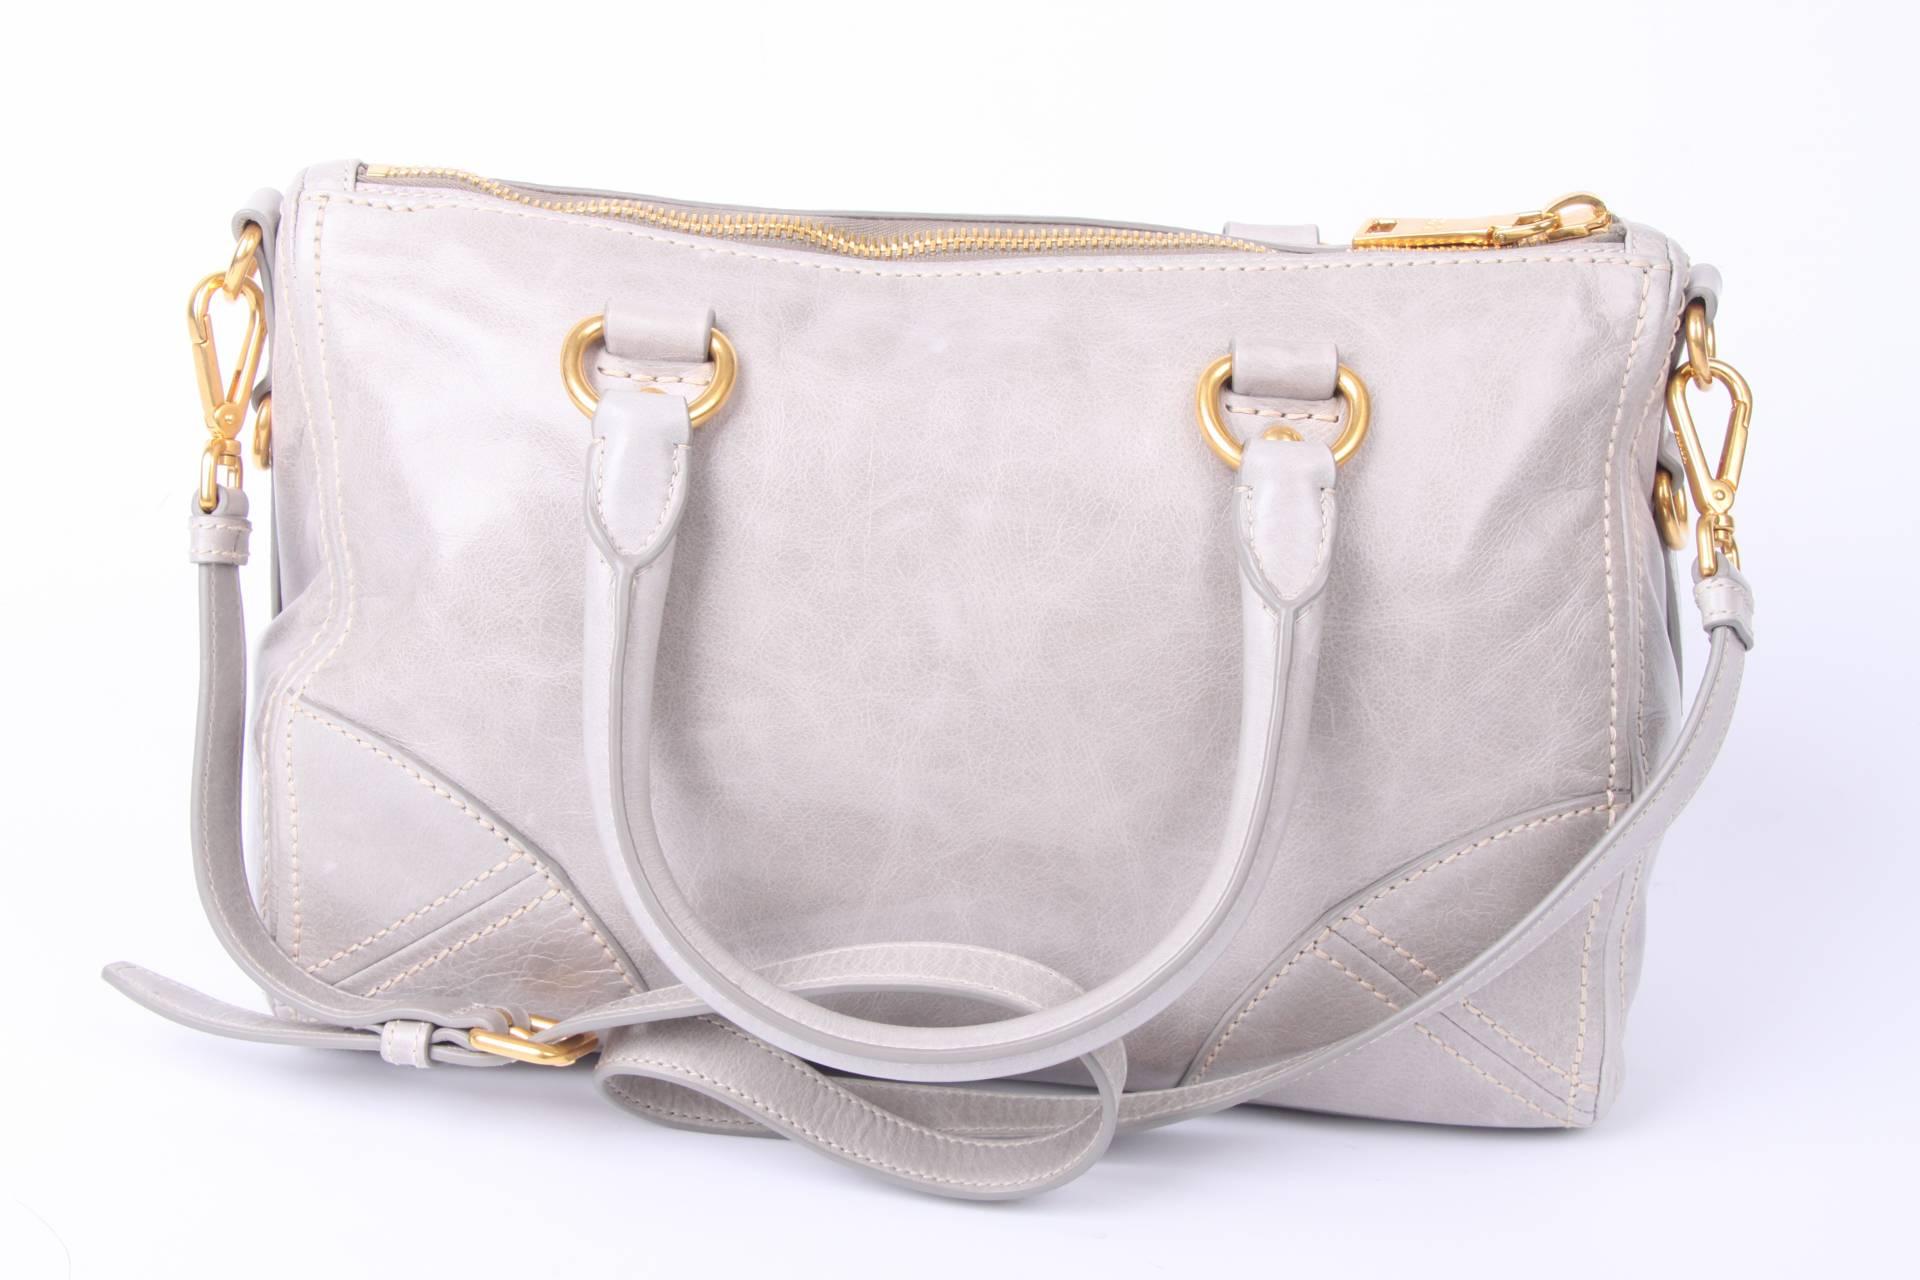 Prada bag crafted in light gray leather in a super handy big size.

This bag has short handles and also a long (adjustable and detachable) shoulder strap. Gold-tone hardware, a PRADA logo at the front and a zipper underneath.

Zip top closure and